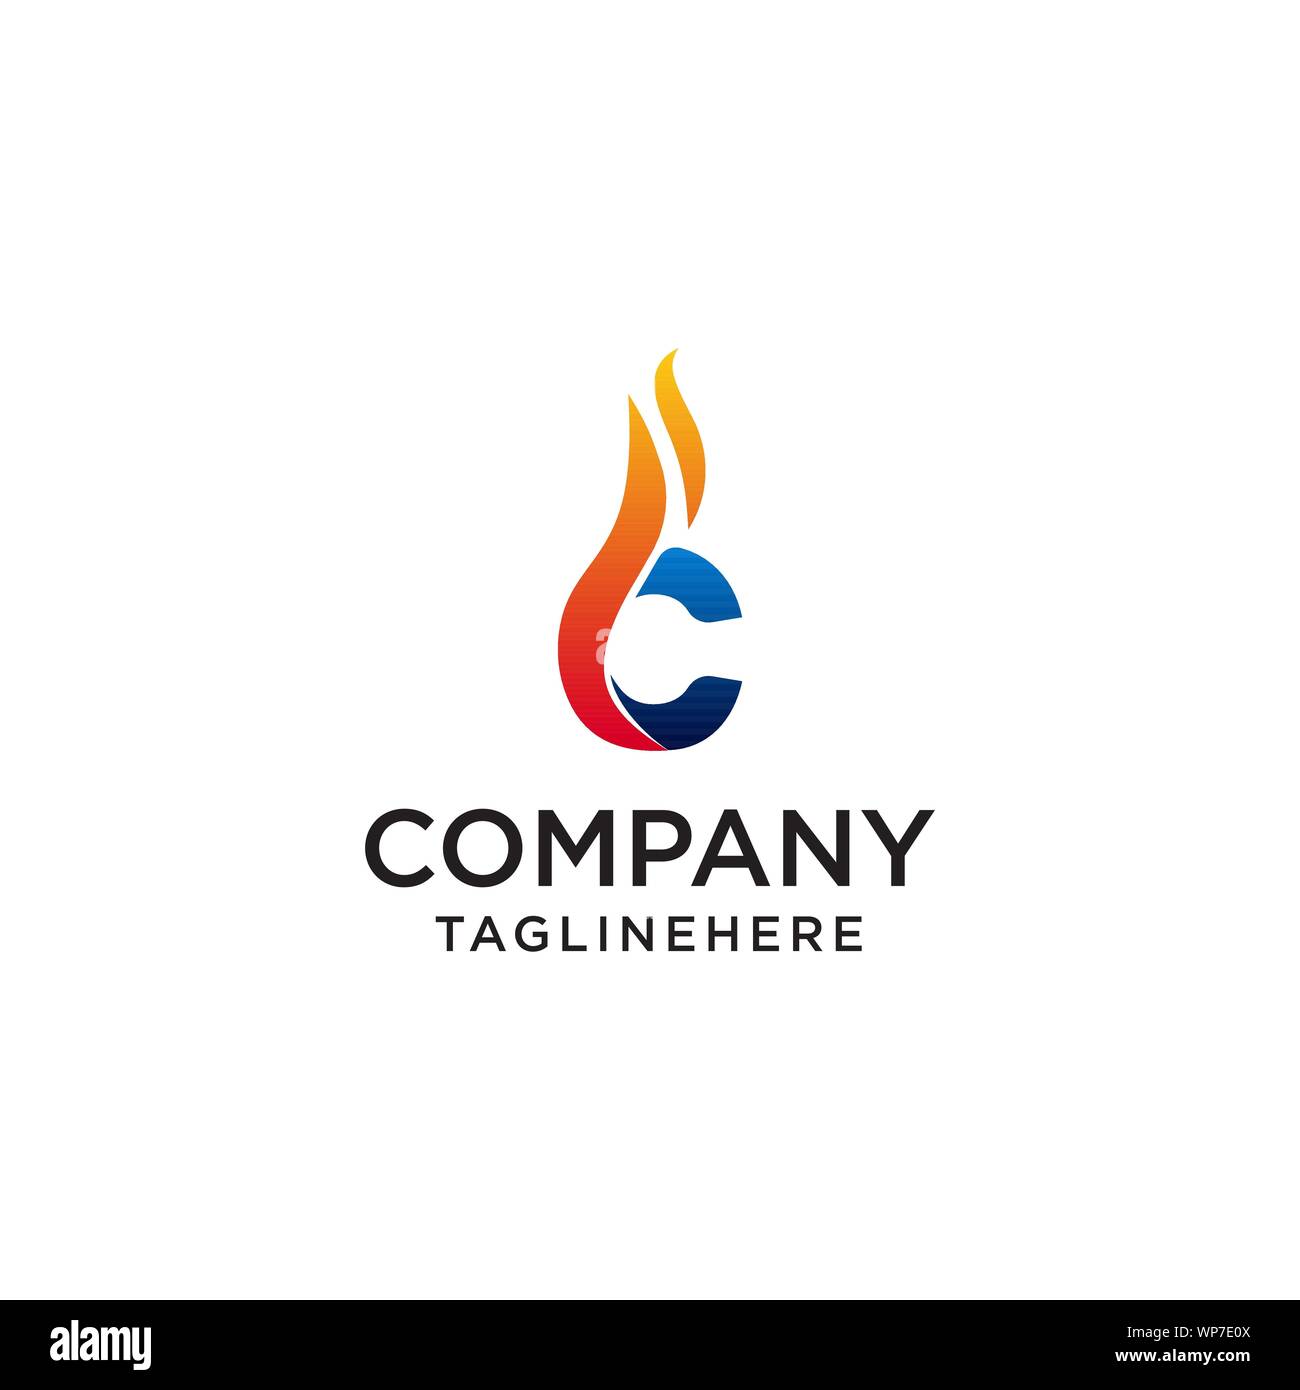 initial Letter C fire logo design. fire company logos, oil companies, mining companies, fire logos, marketing, corporate business logos. icon. vector Stock Vector